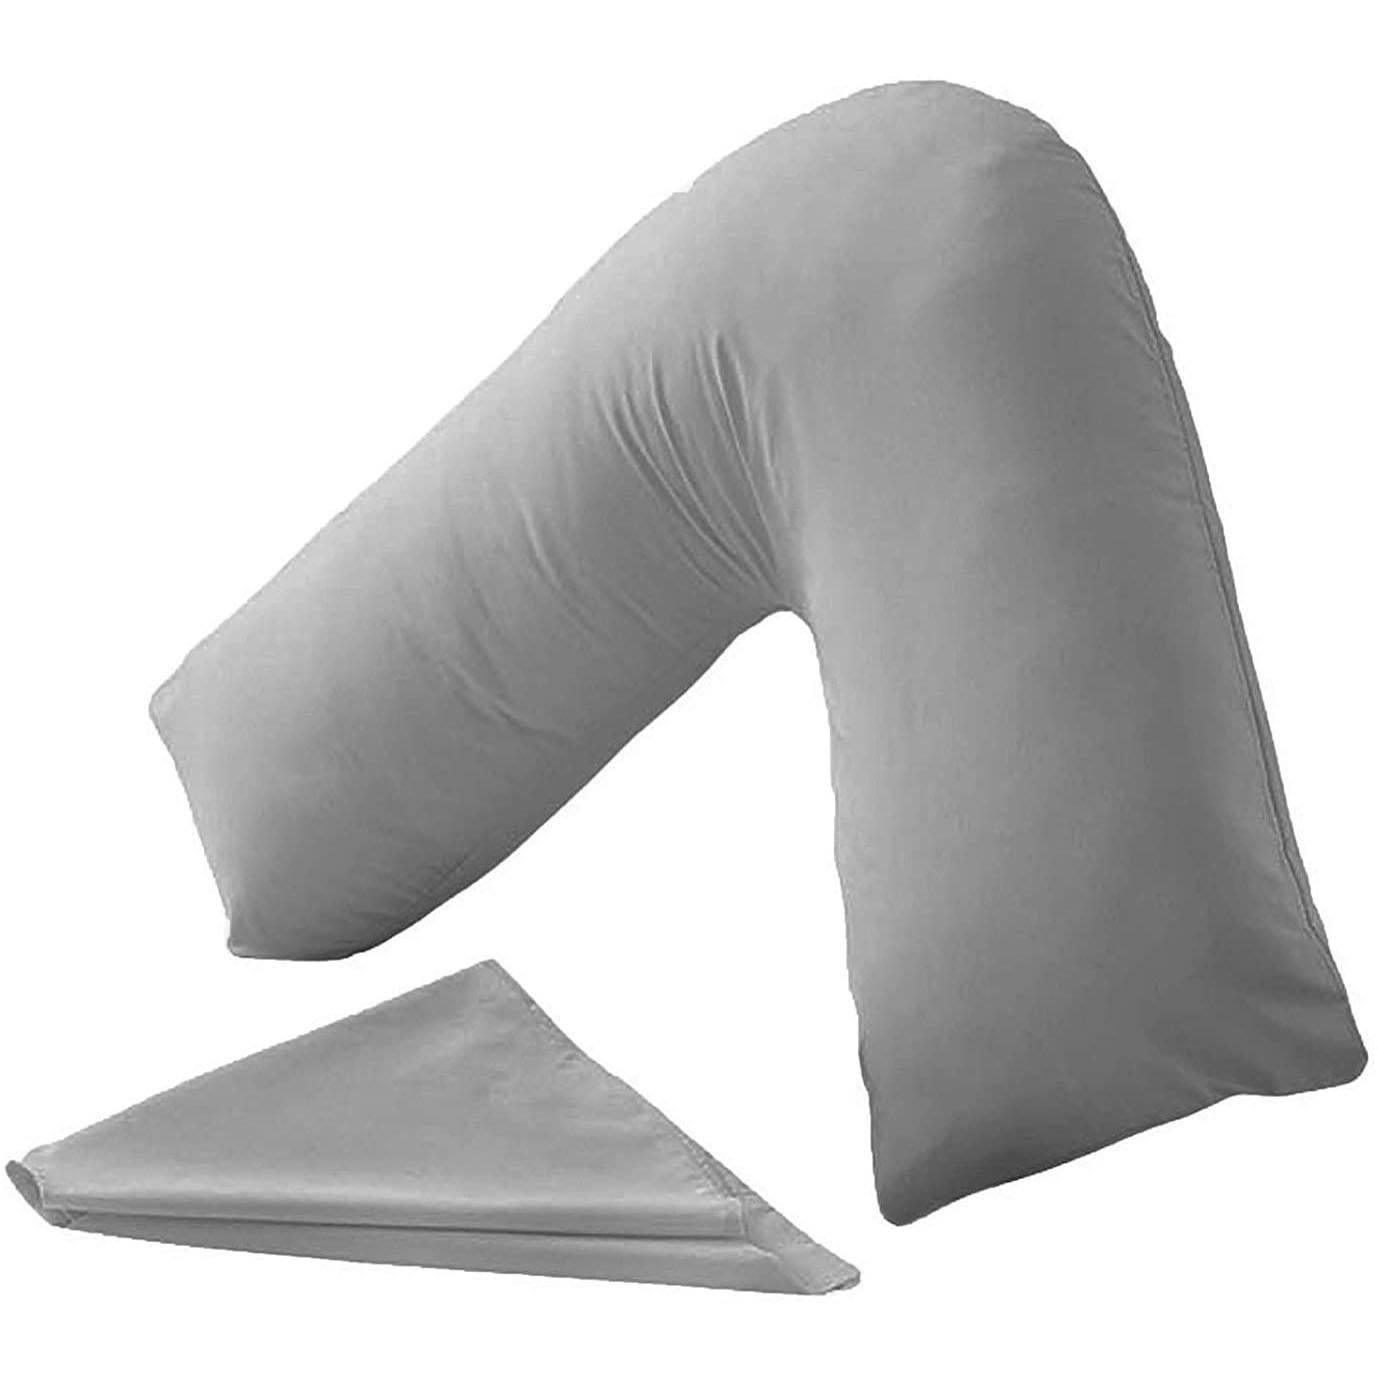 View V Shaped Support Pillow Grey information